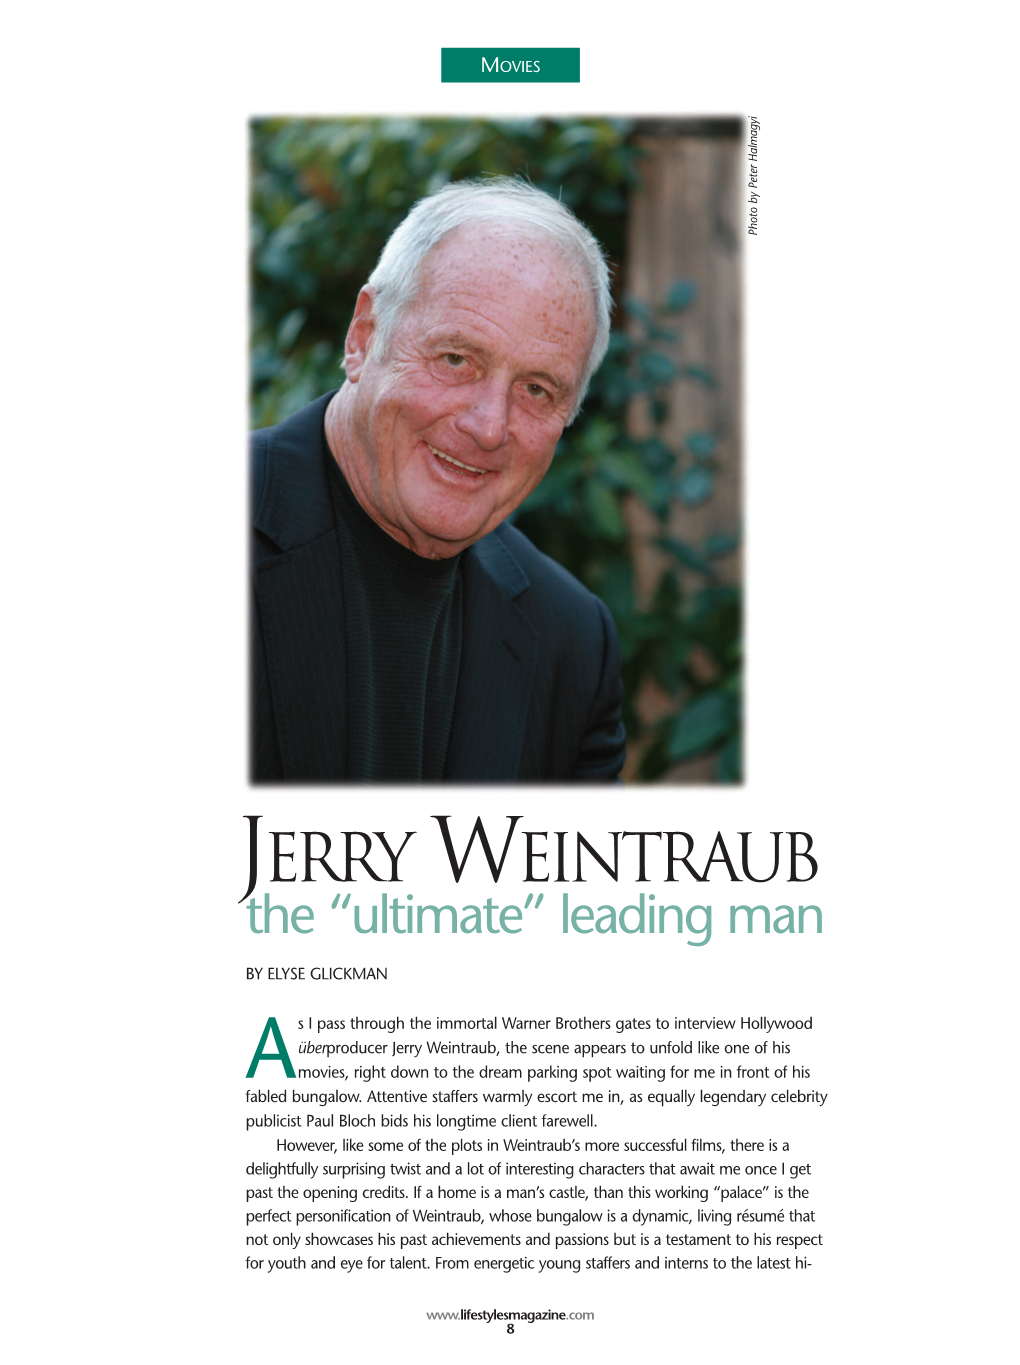 JERRY WEINTRAUB the “Ultimate” Leading Man